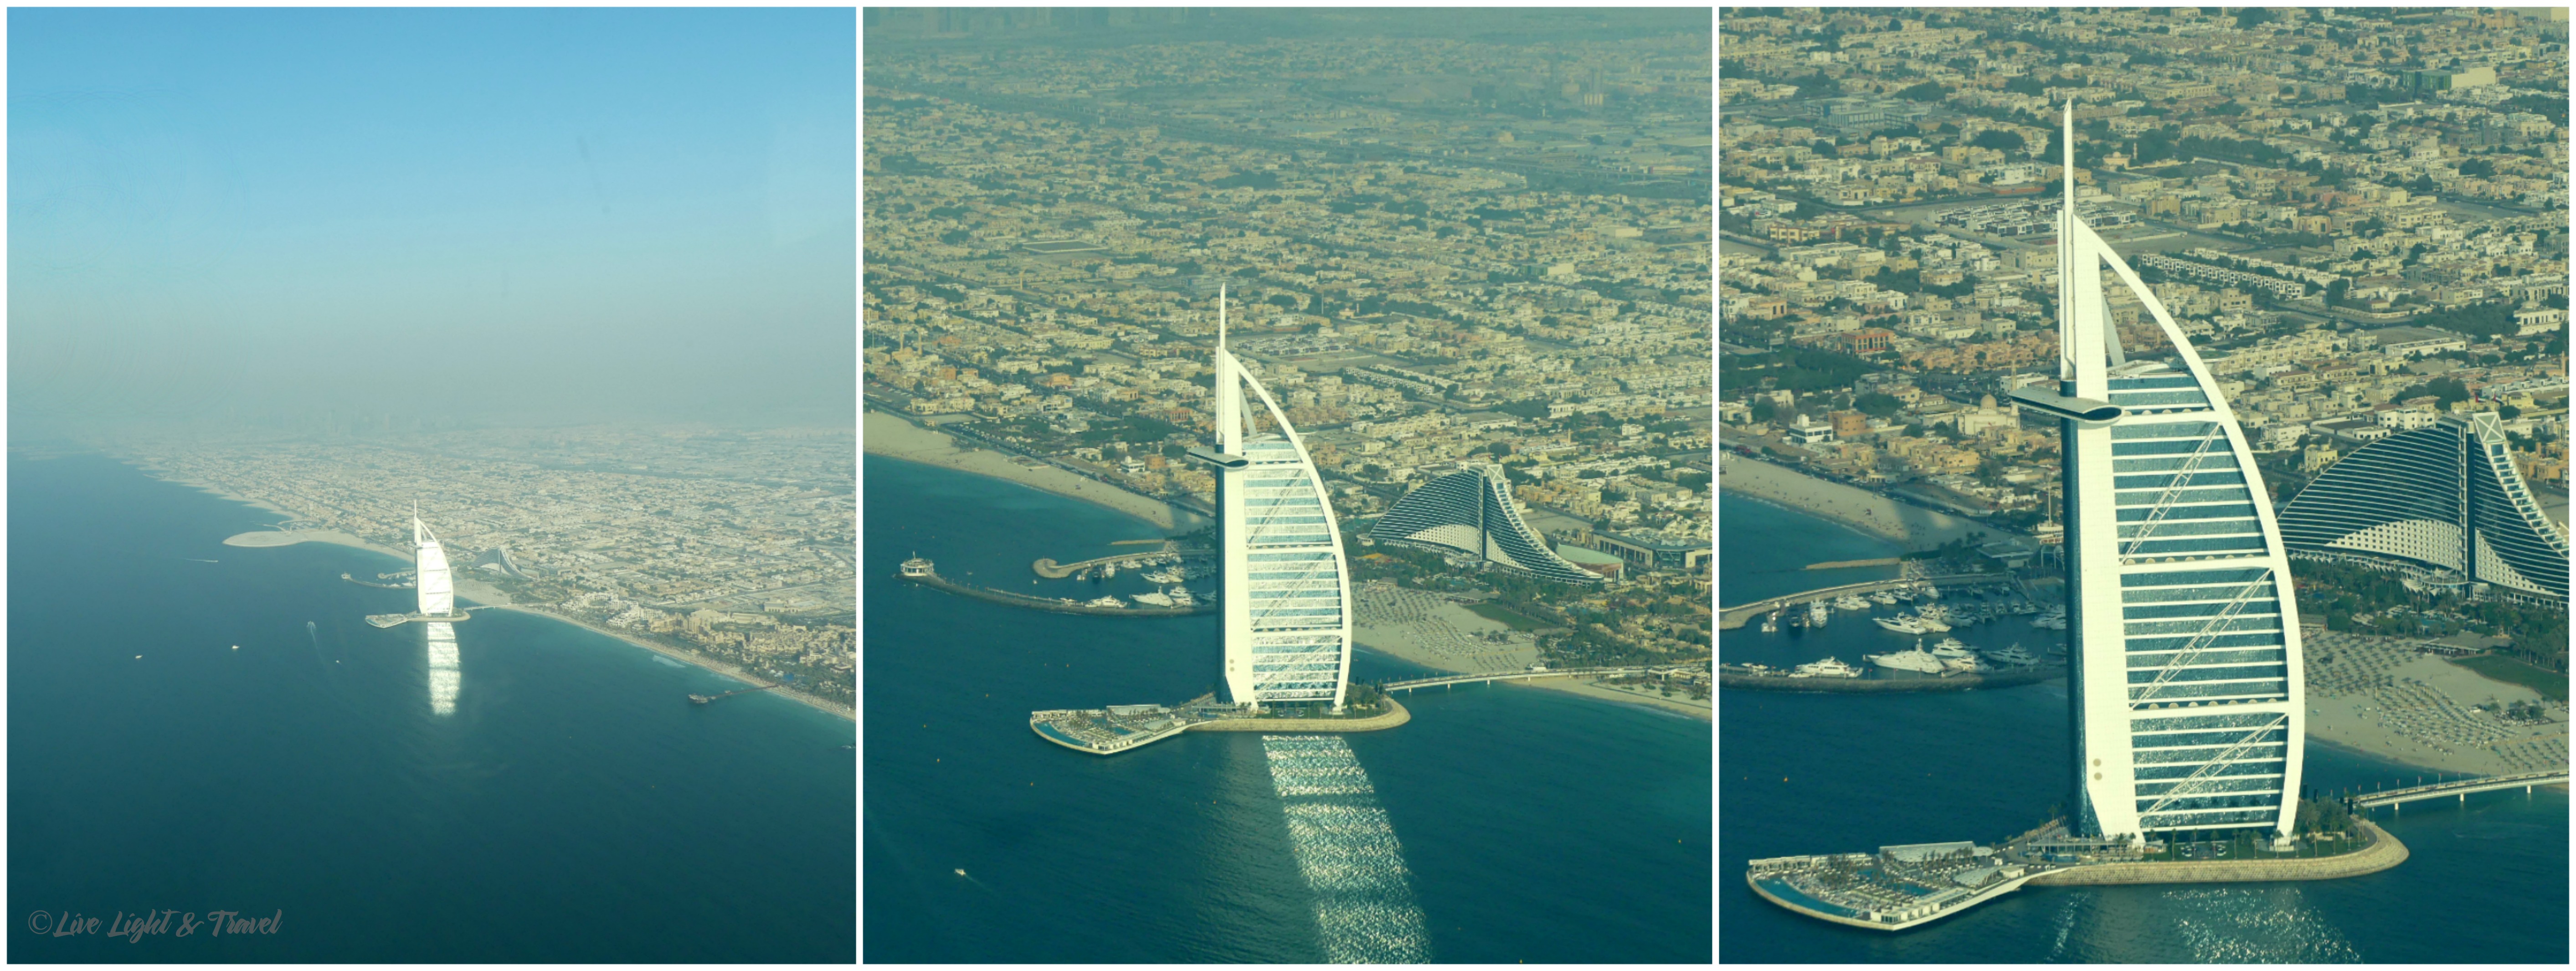 And to your right, we're coming upon Burj Al Arab! Behind and to the right is the Jumeirah Beach Hotel! 